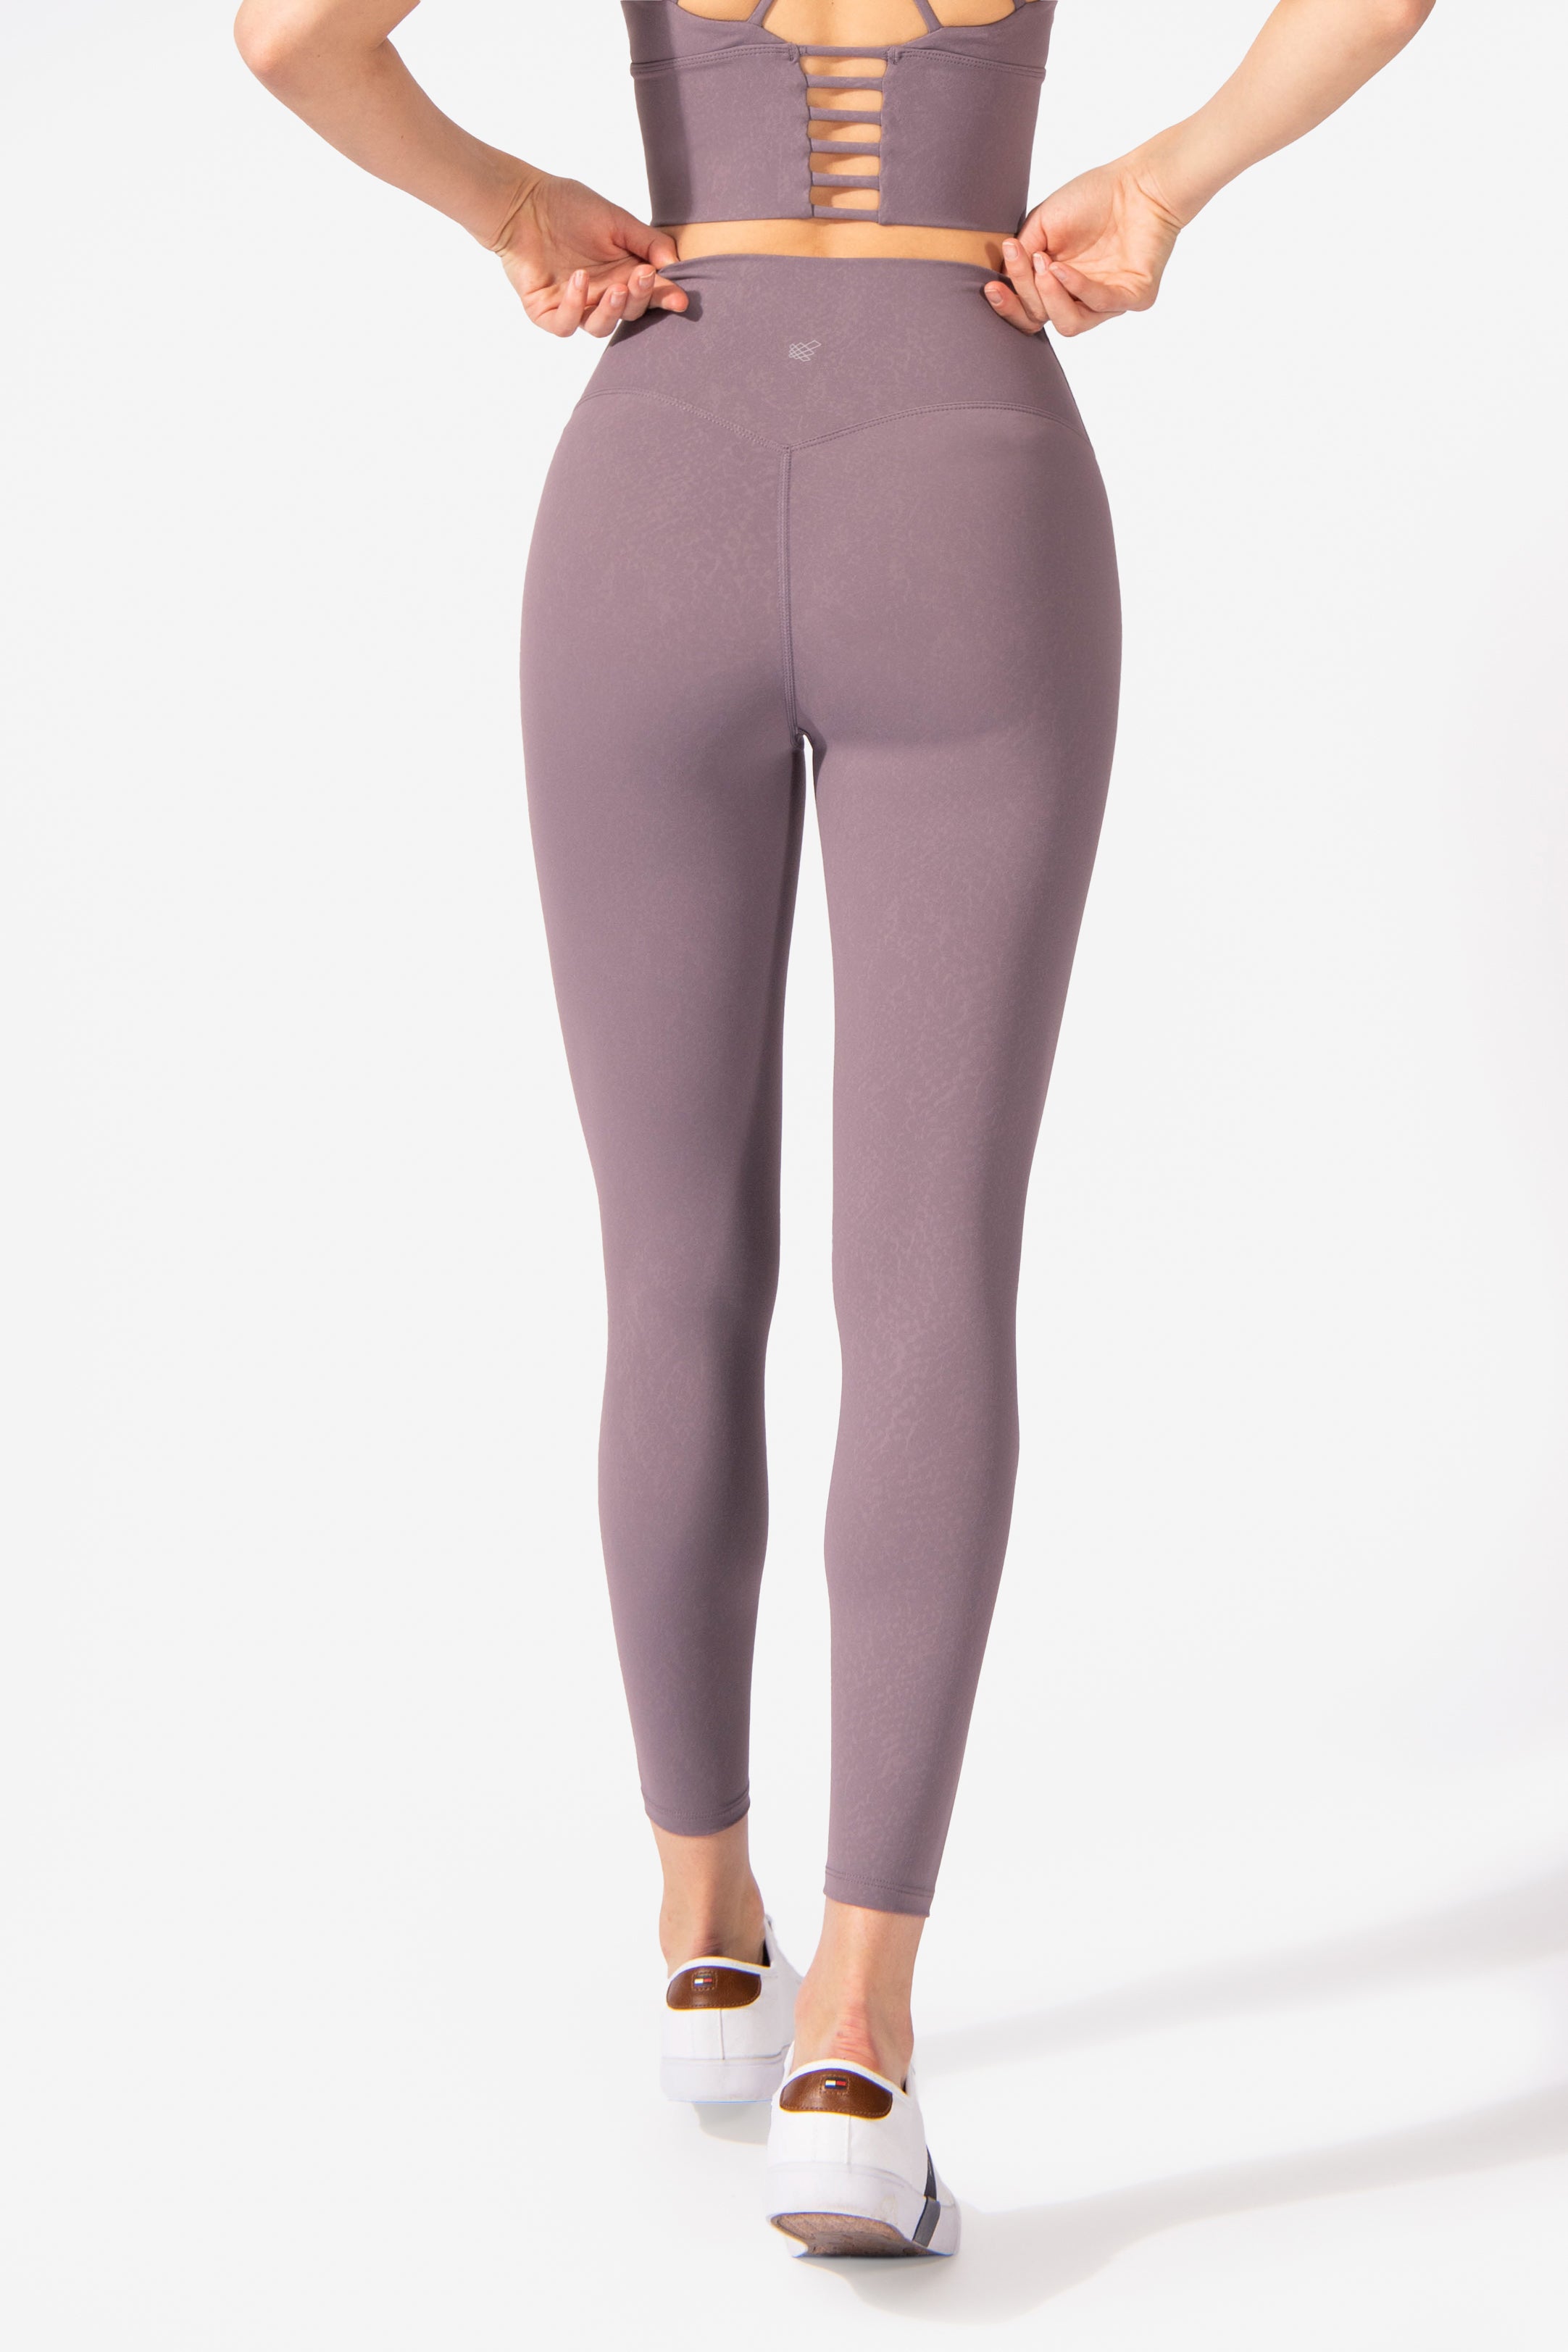 Ladies High Waisted 3/4 Performance Yoga Fitness Leggings With Pockets - 99  Rands